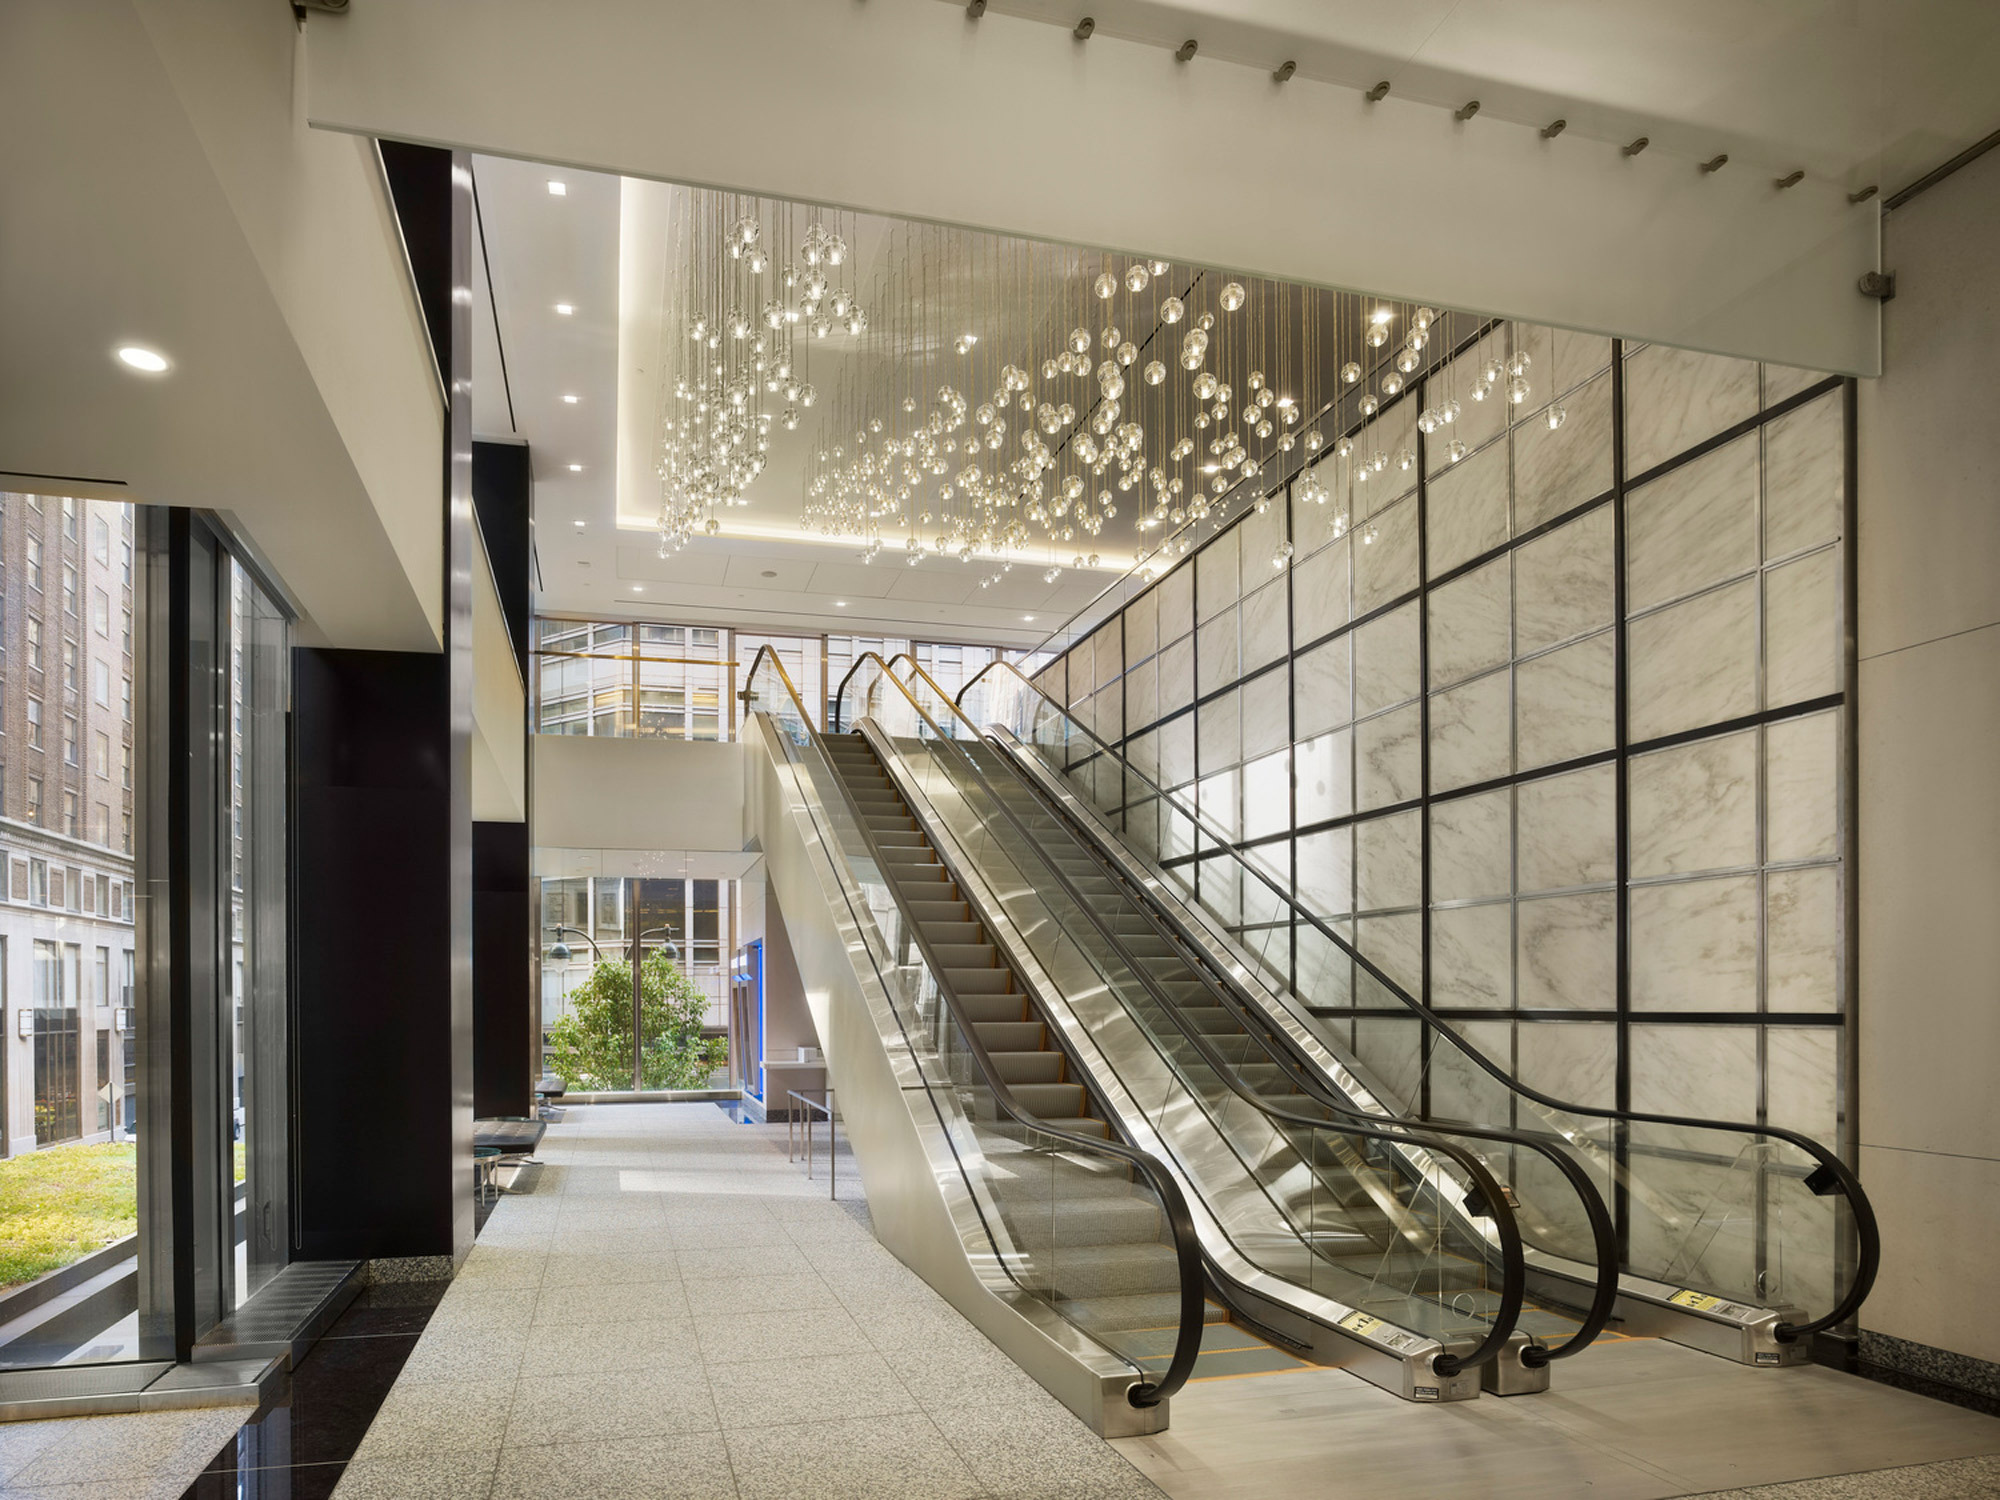 Luminous modern lobby with a pair of sleek escalators, illuminated by a floating bubble-like chandelier. The backlit translucent stone wall panels exude a warm glow, enhancing the luxurious ambience.